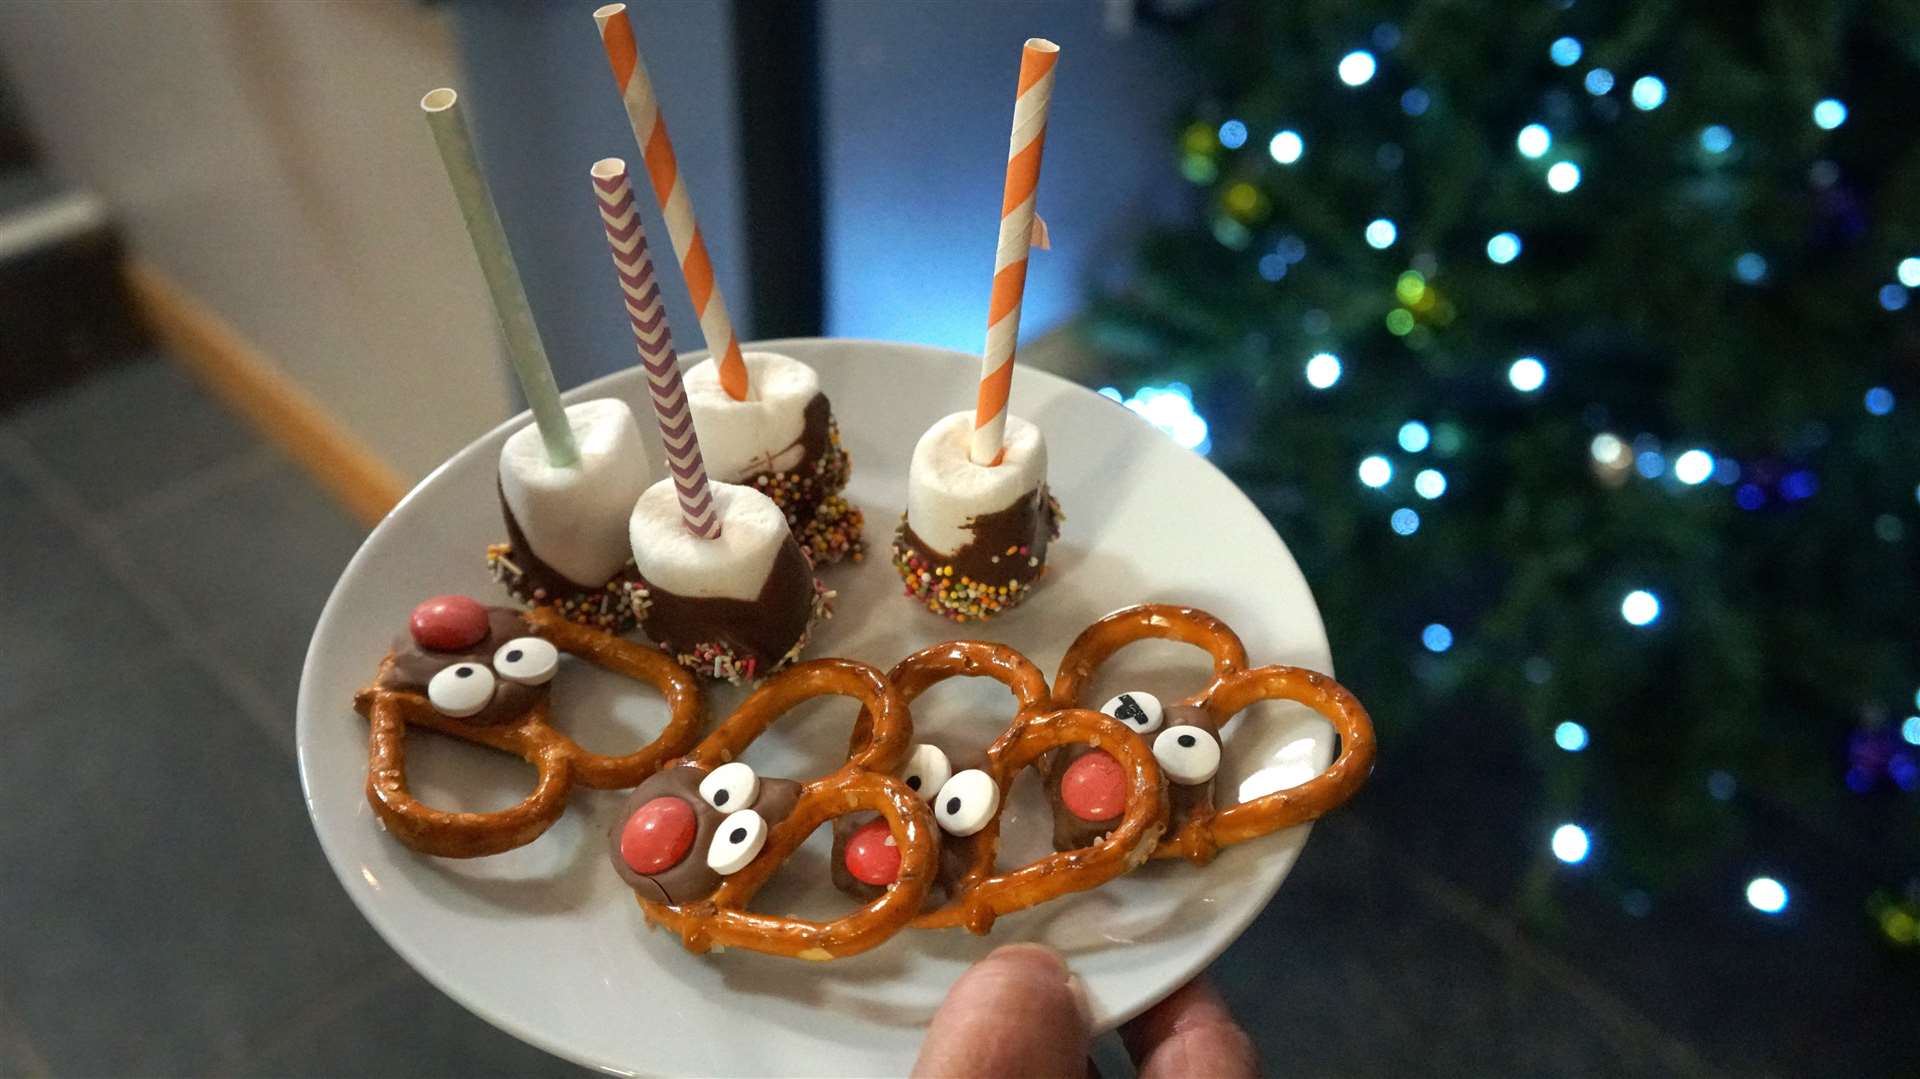 Some of the special treats made by PPP staff and volunteers. Picture: DGS